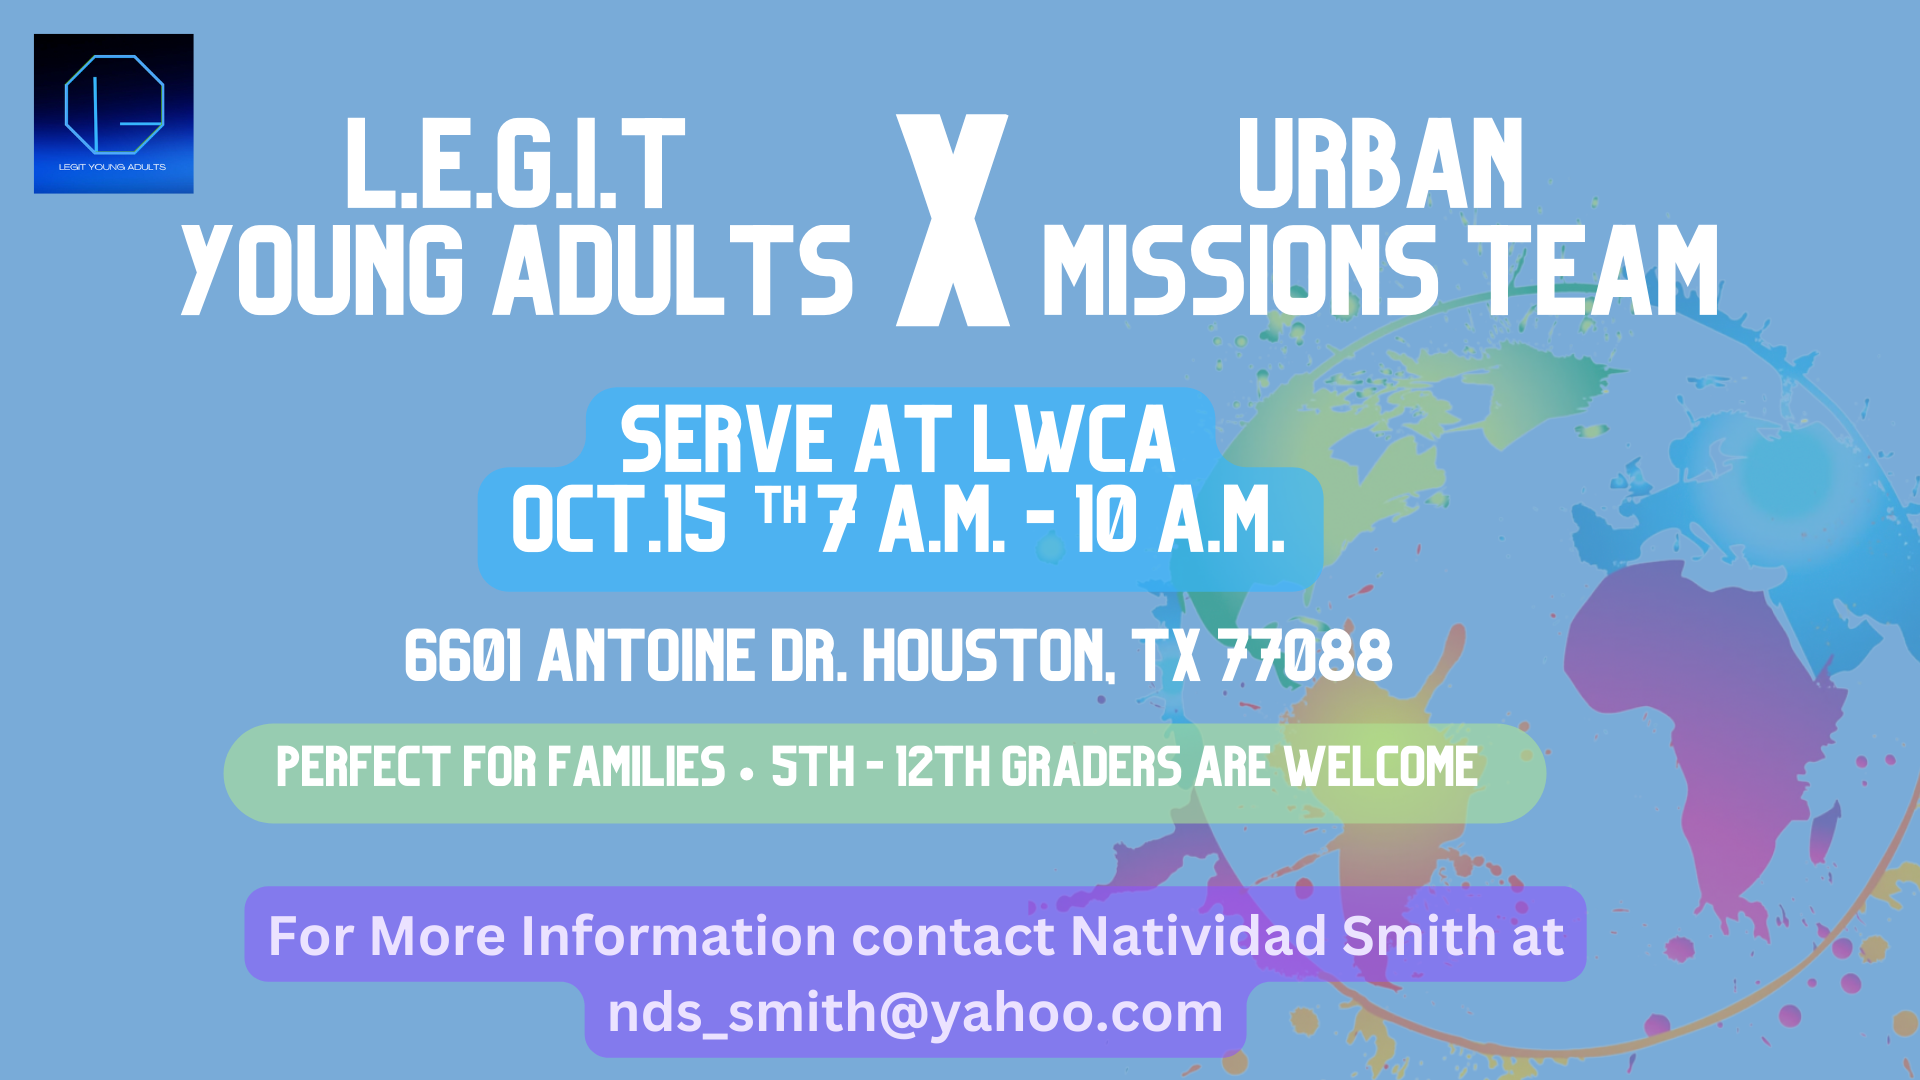 LEGIT Young Adults & Urban Missions Team Outreach Event head image